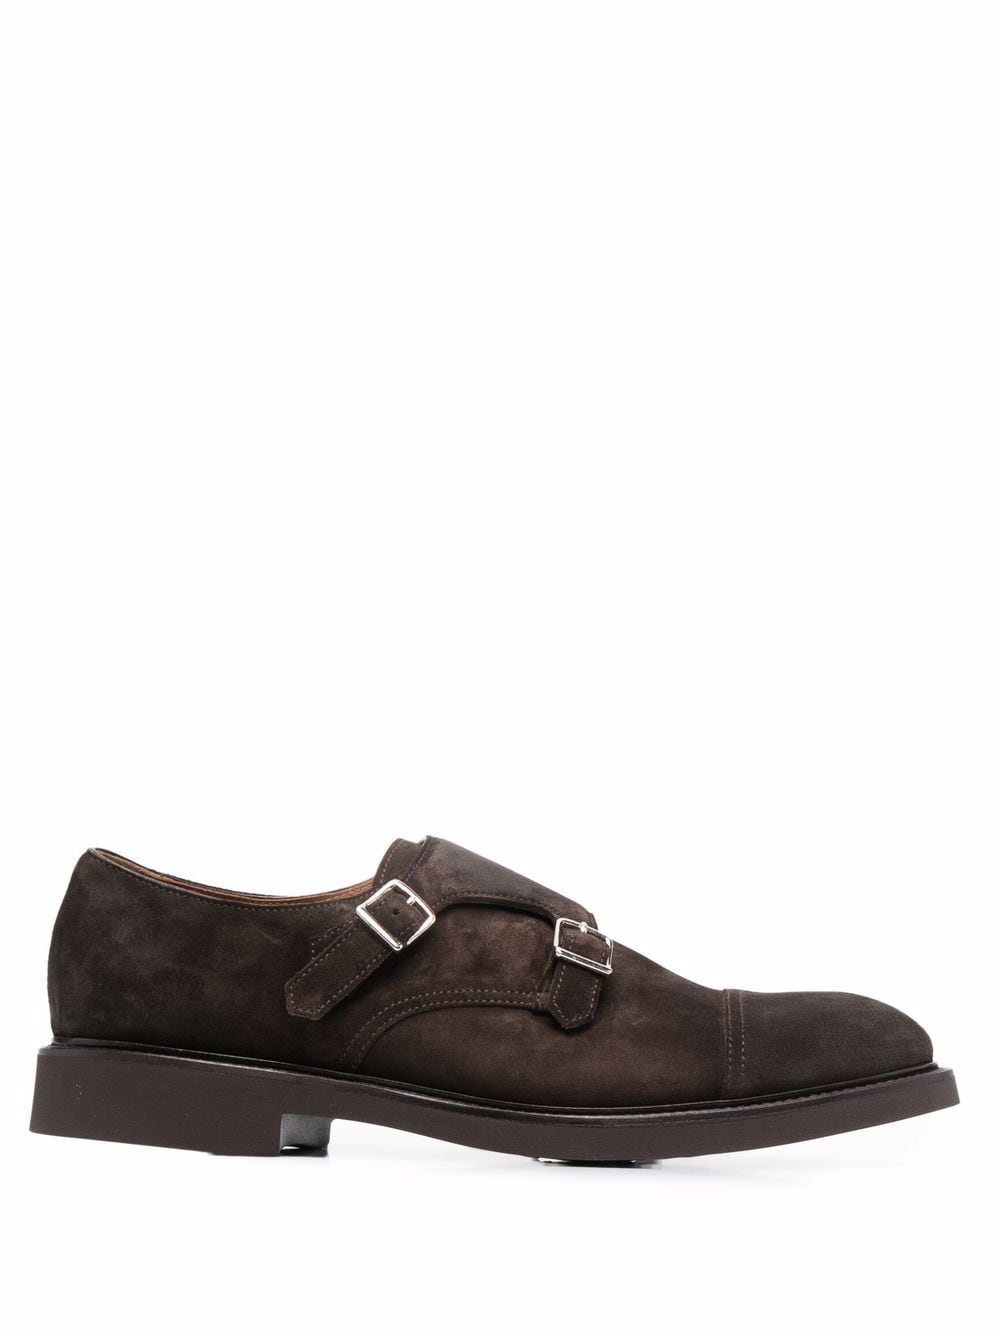 Doucal's suede double-buckle monk shoes - Brown von Doucal's